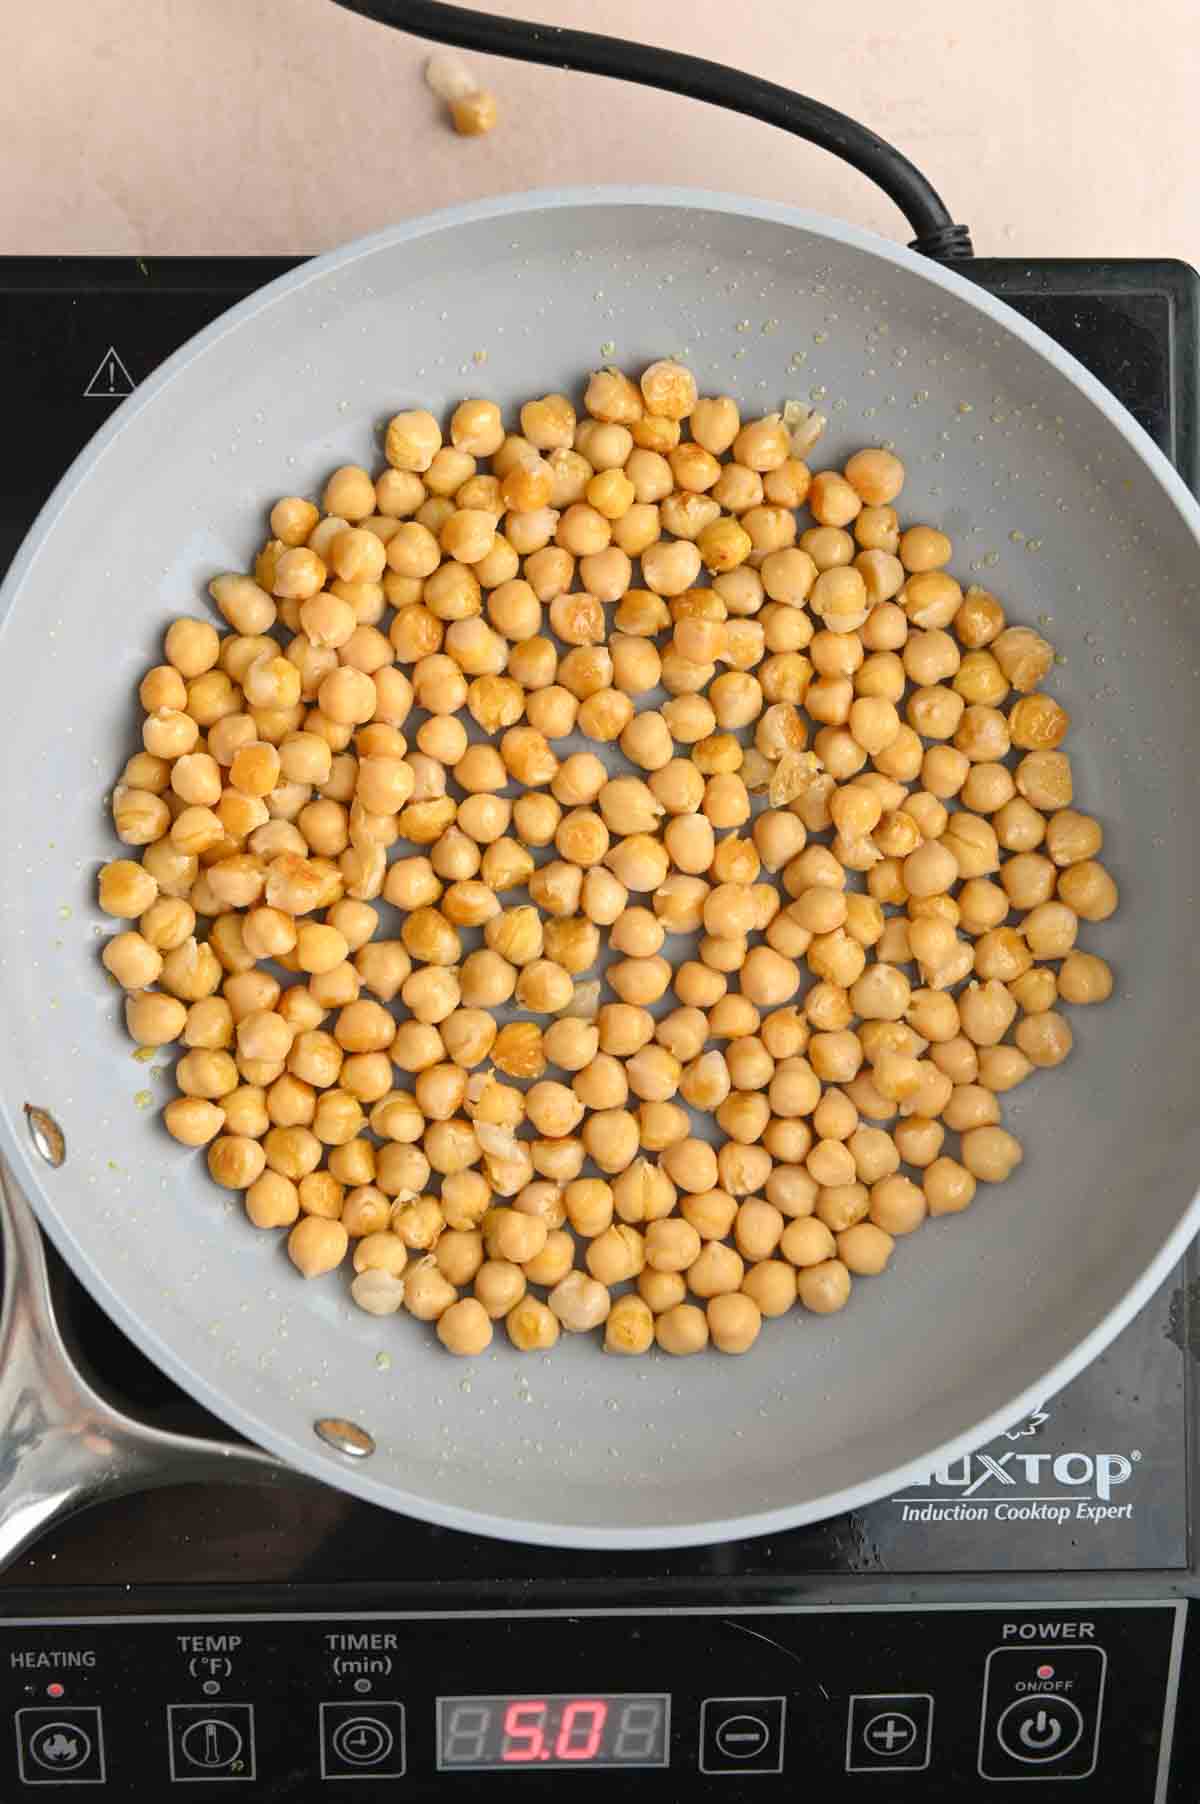 Chickpeas cooking in a gray skillet on a black cooktop.